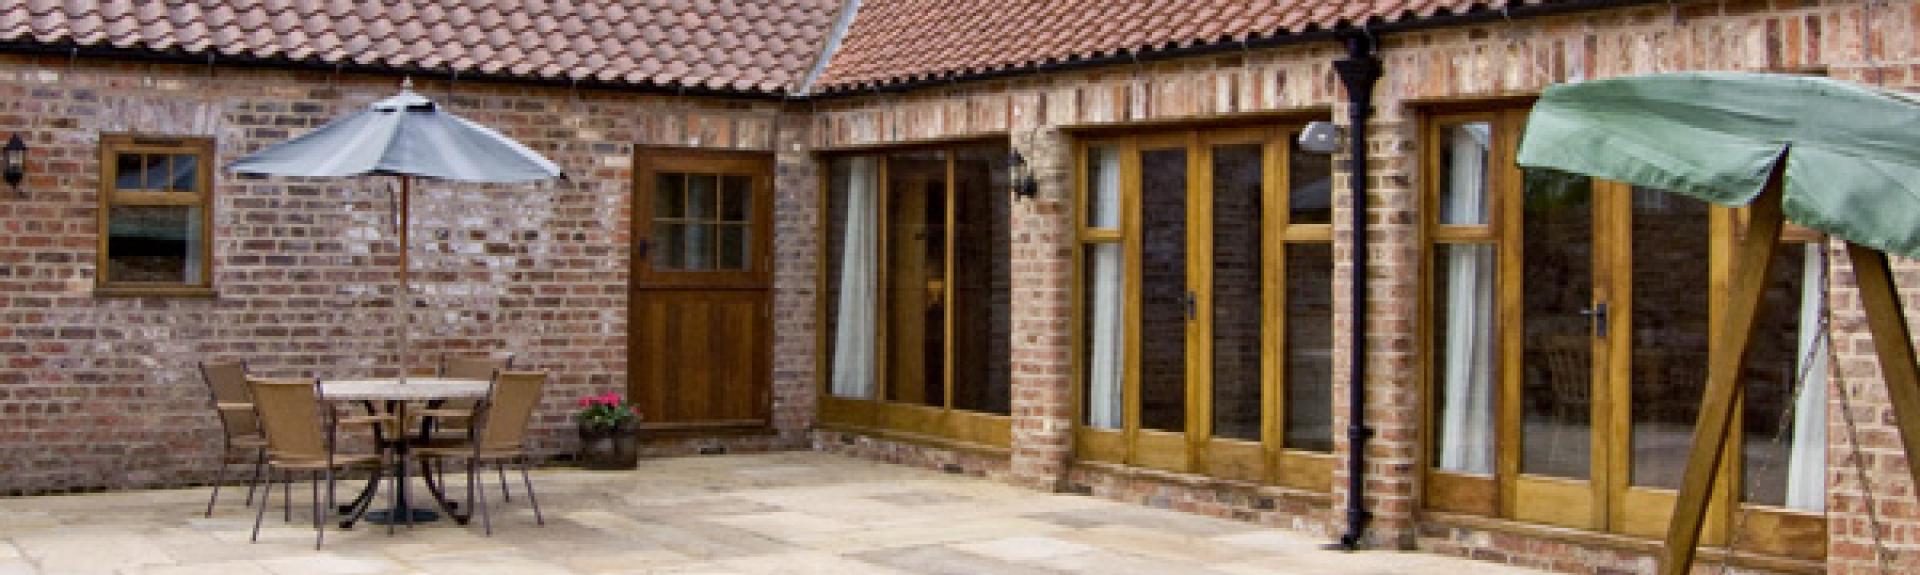 A courtyard barn conversion with a frontage comprising wall-to-ceiling French windows.